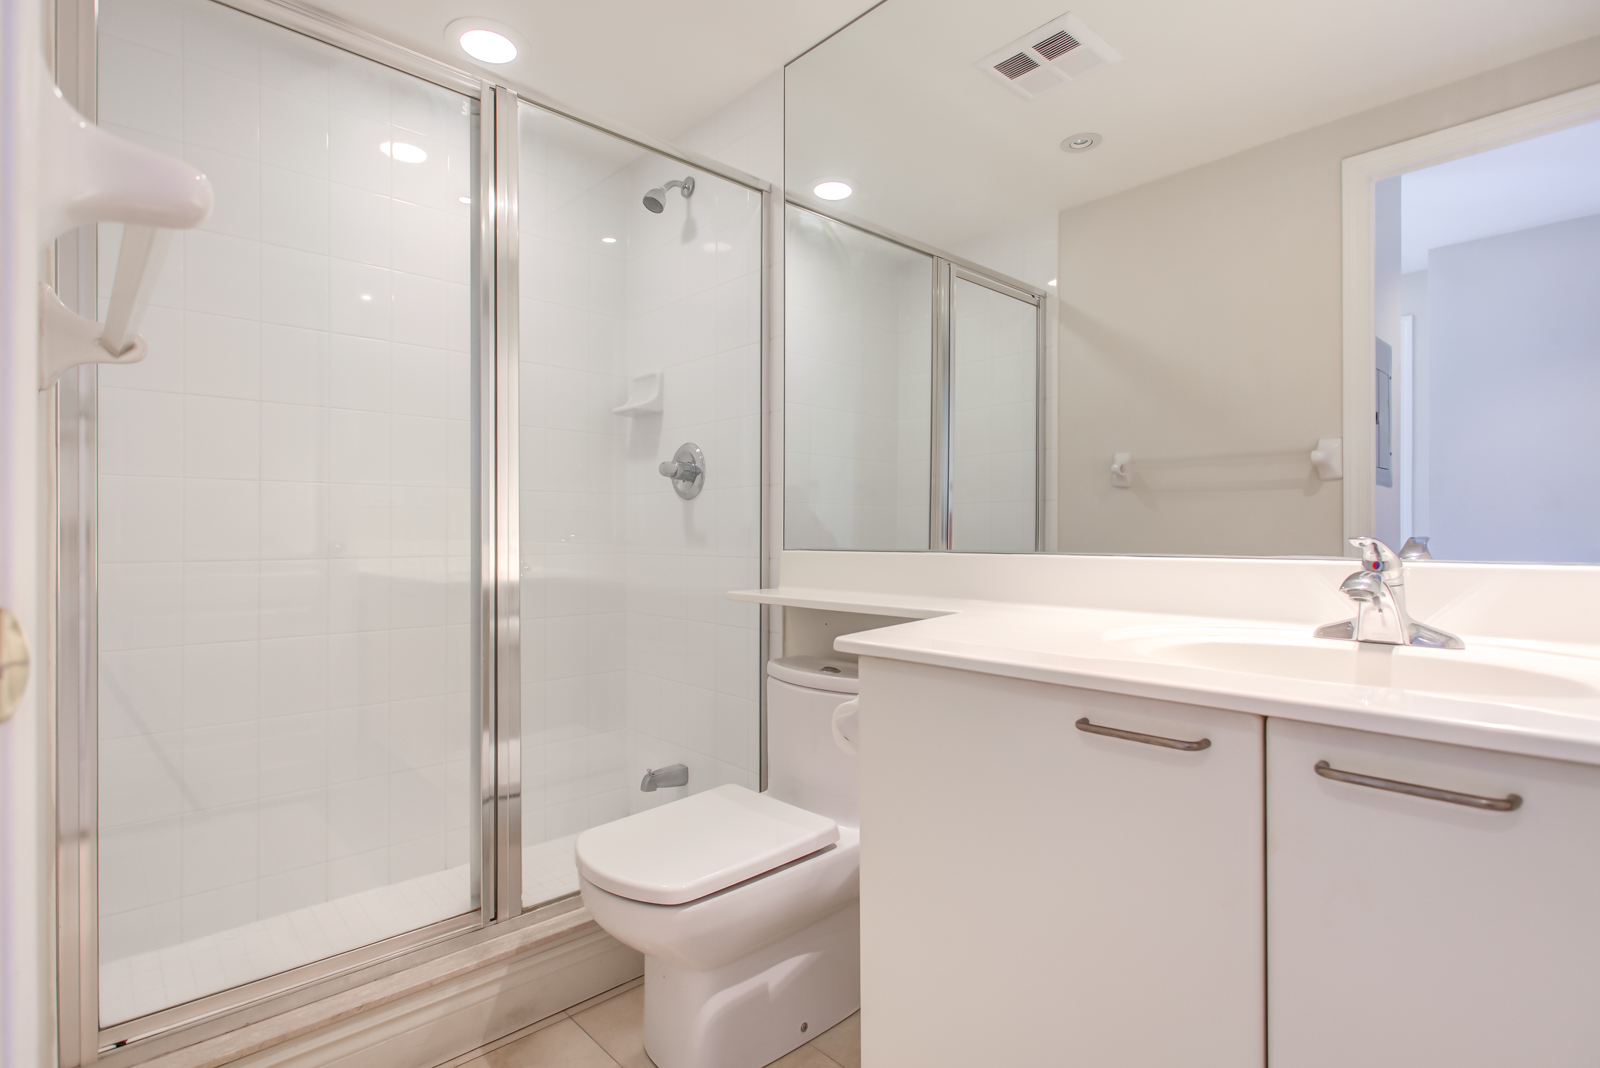 Washroom of 20 Collier St Unit 408 with walk-in shower, white sink and cabinet, and huge mirror.